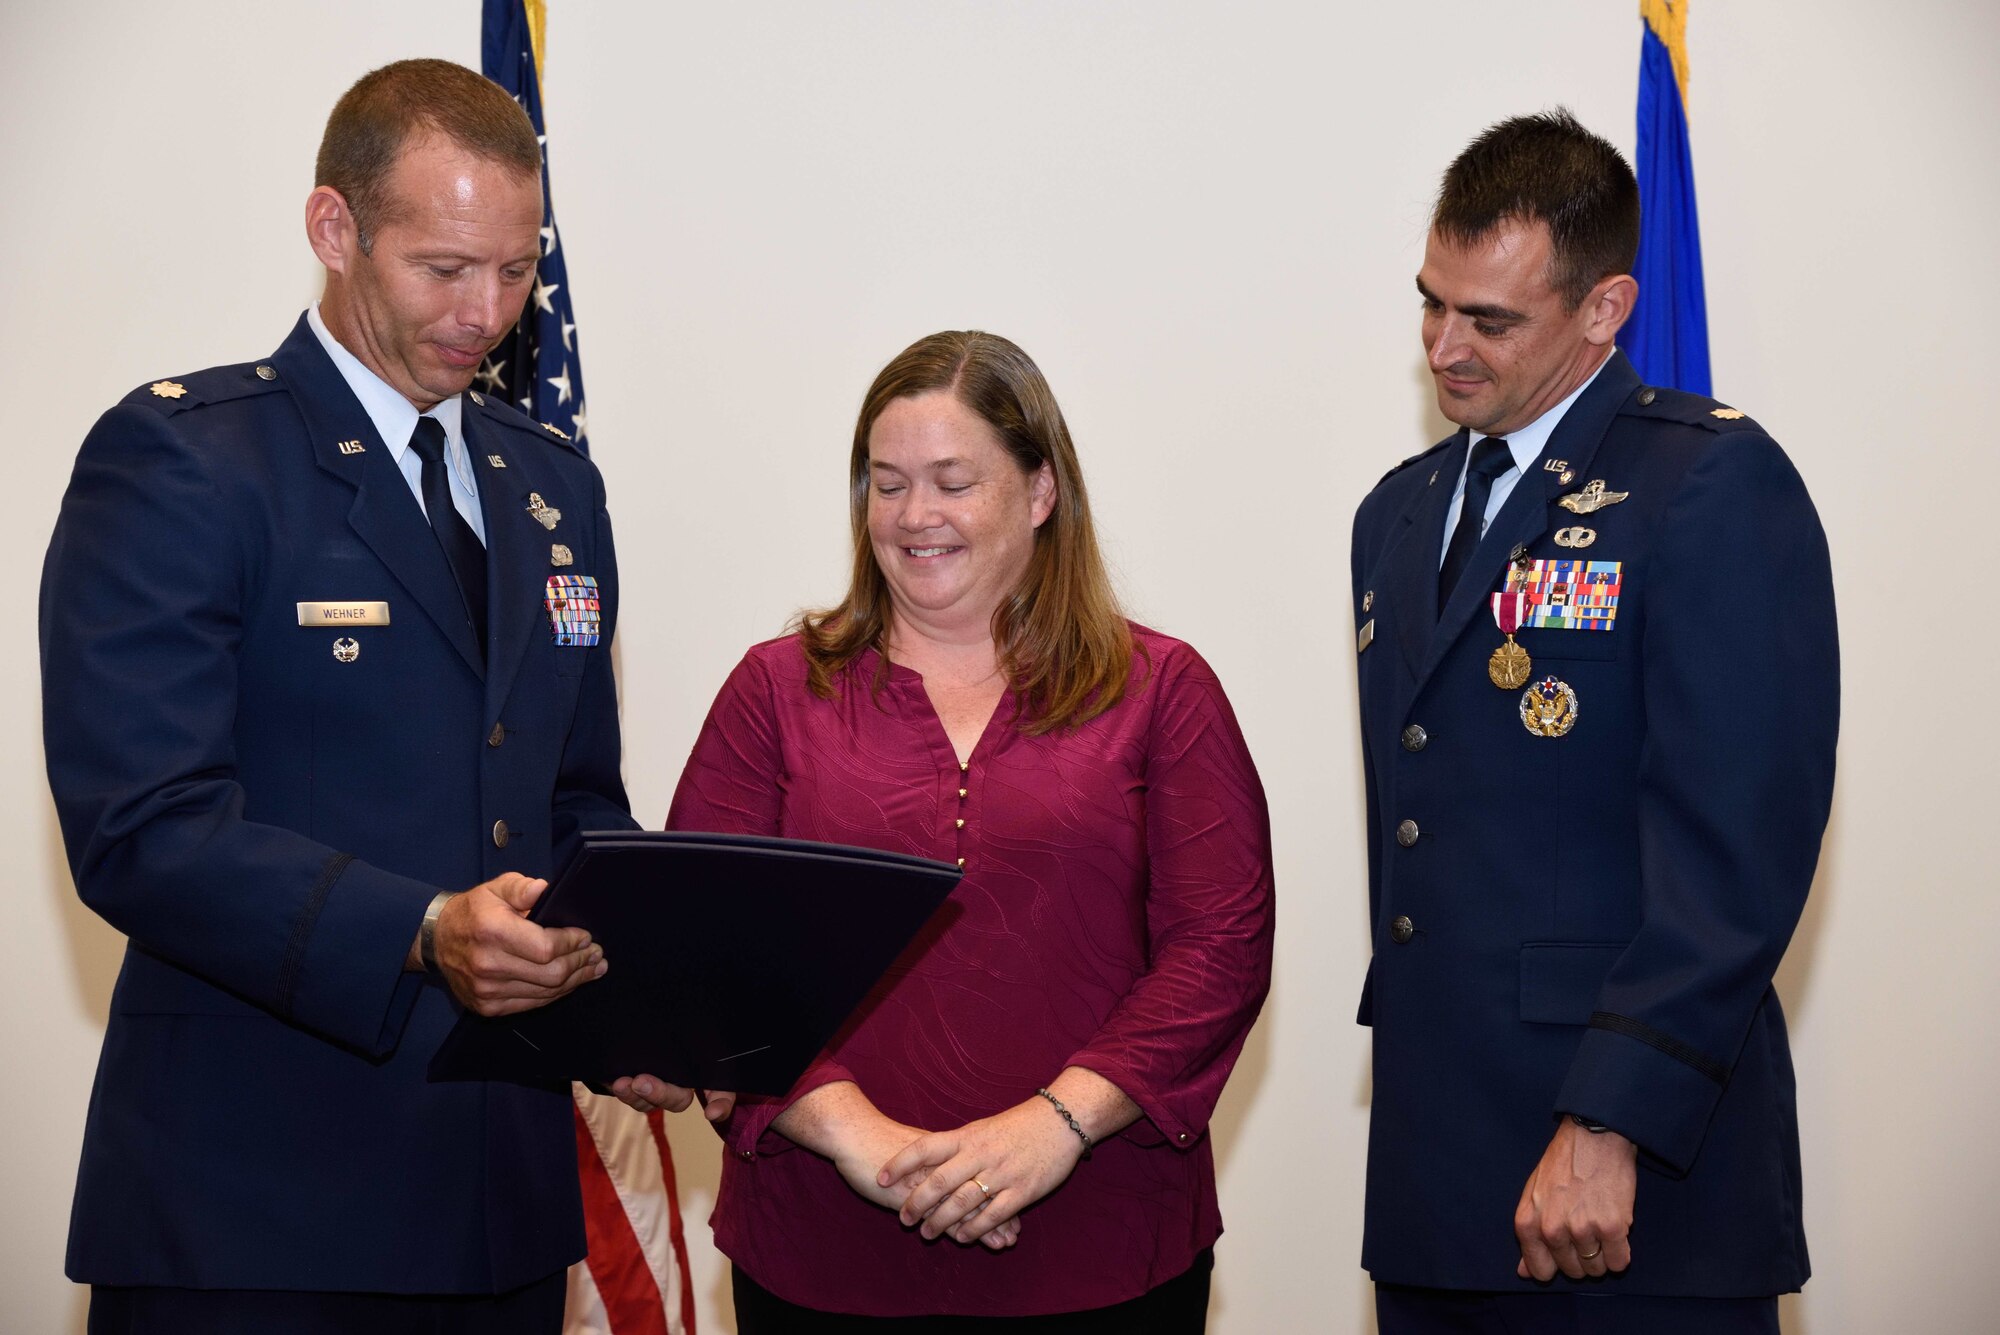 Lt. Col. (retired) Matthew Wehner (left) gives a spouse’s appreciation certificate to Megan Rubio, wife of Lt. Col. Stuart M. Rubio (right), commander of the Air Force Reserve’s 815th Airlift Squadron “Flying Jennies” during Lt. Col. Rubio’s retirement ceremony held July 28, 2018, at the Roberts Consolidated Maintenance Facility, Keesler Air Force Base, Mississippi. Rubio, an active-duty C-130 pilot who has been commander of the Flying Jennies since February of 2016, will still continue to serve as commander of the squadron, but instead as a reservist as part of the Regular Air Force to Air Force Reserve Program. (U.S. Air Force photo by Tech. Sgt. Ryan Labadens)